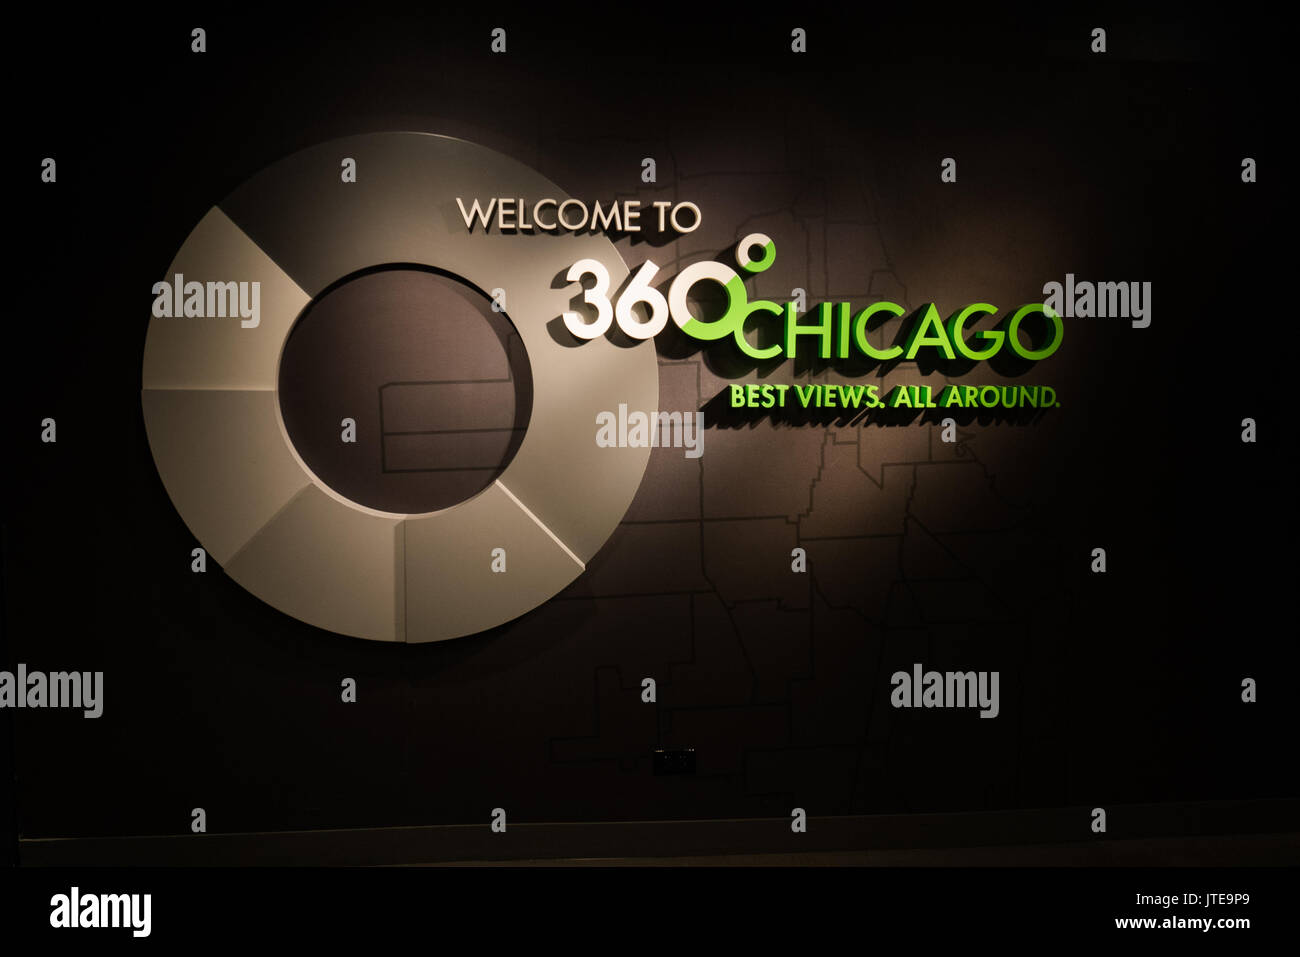 chicago 360 sign Stock Photo